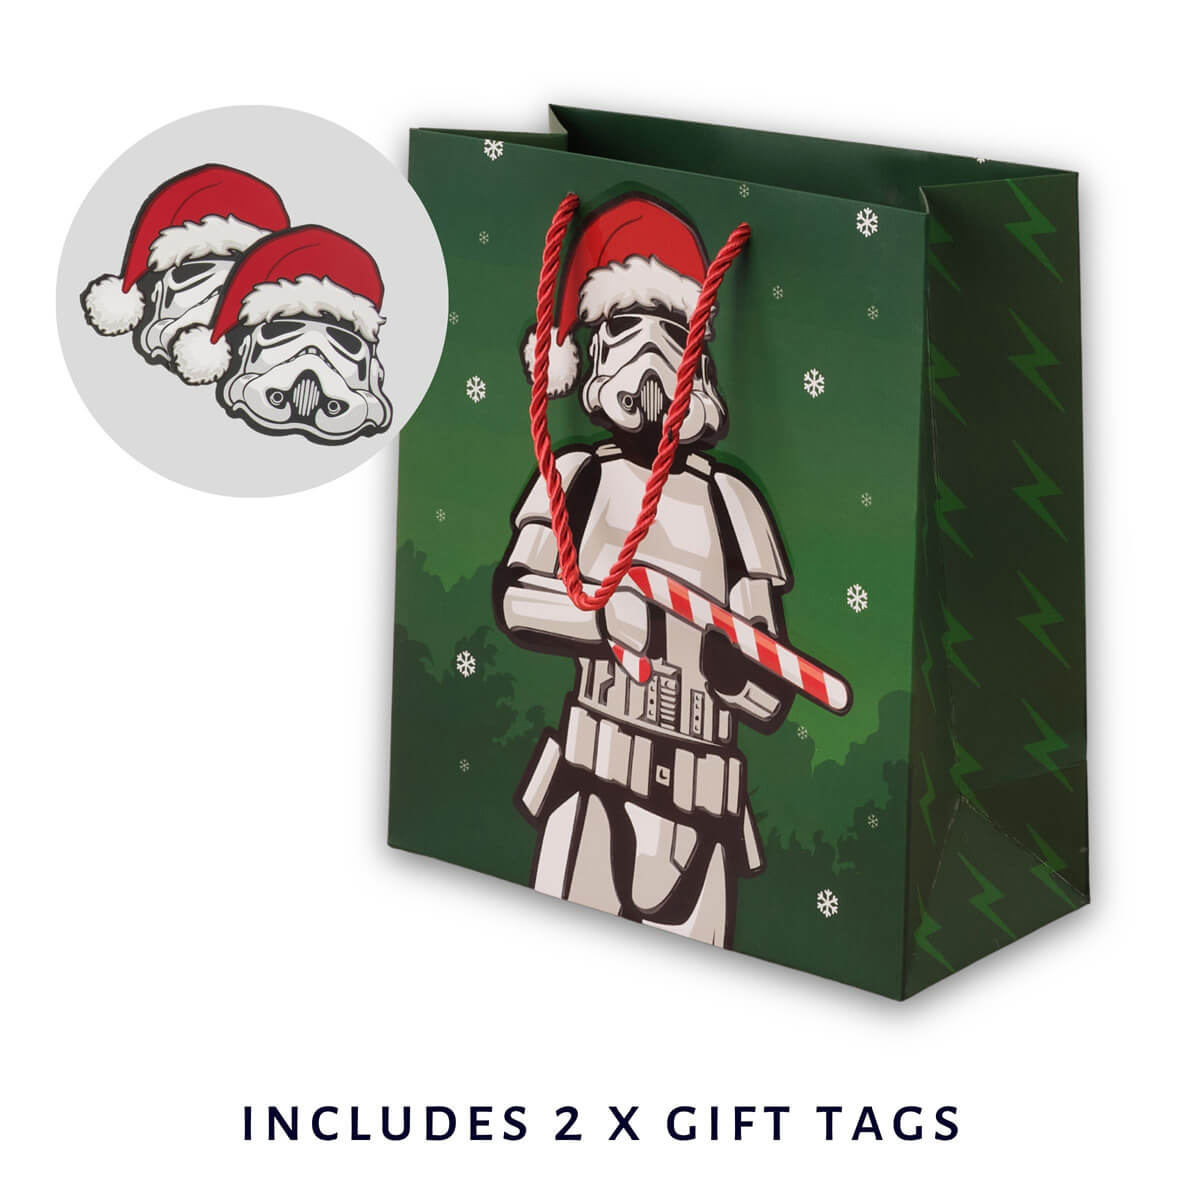 Original Stormtrooper Christmas Gift Bag - Medium sized - close up image showing green gift bag with a stormtrooper wearing a santa hat and holding a candy cane